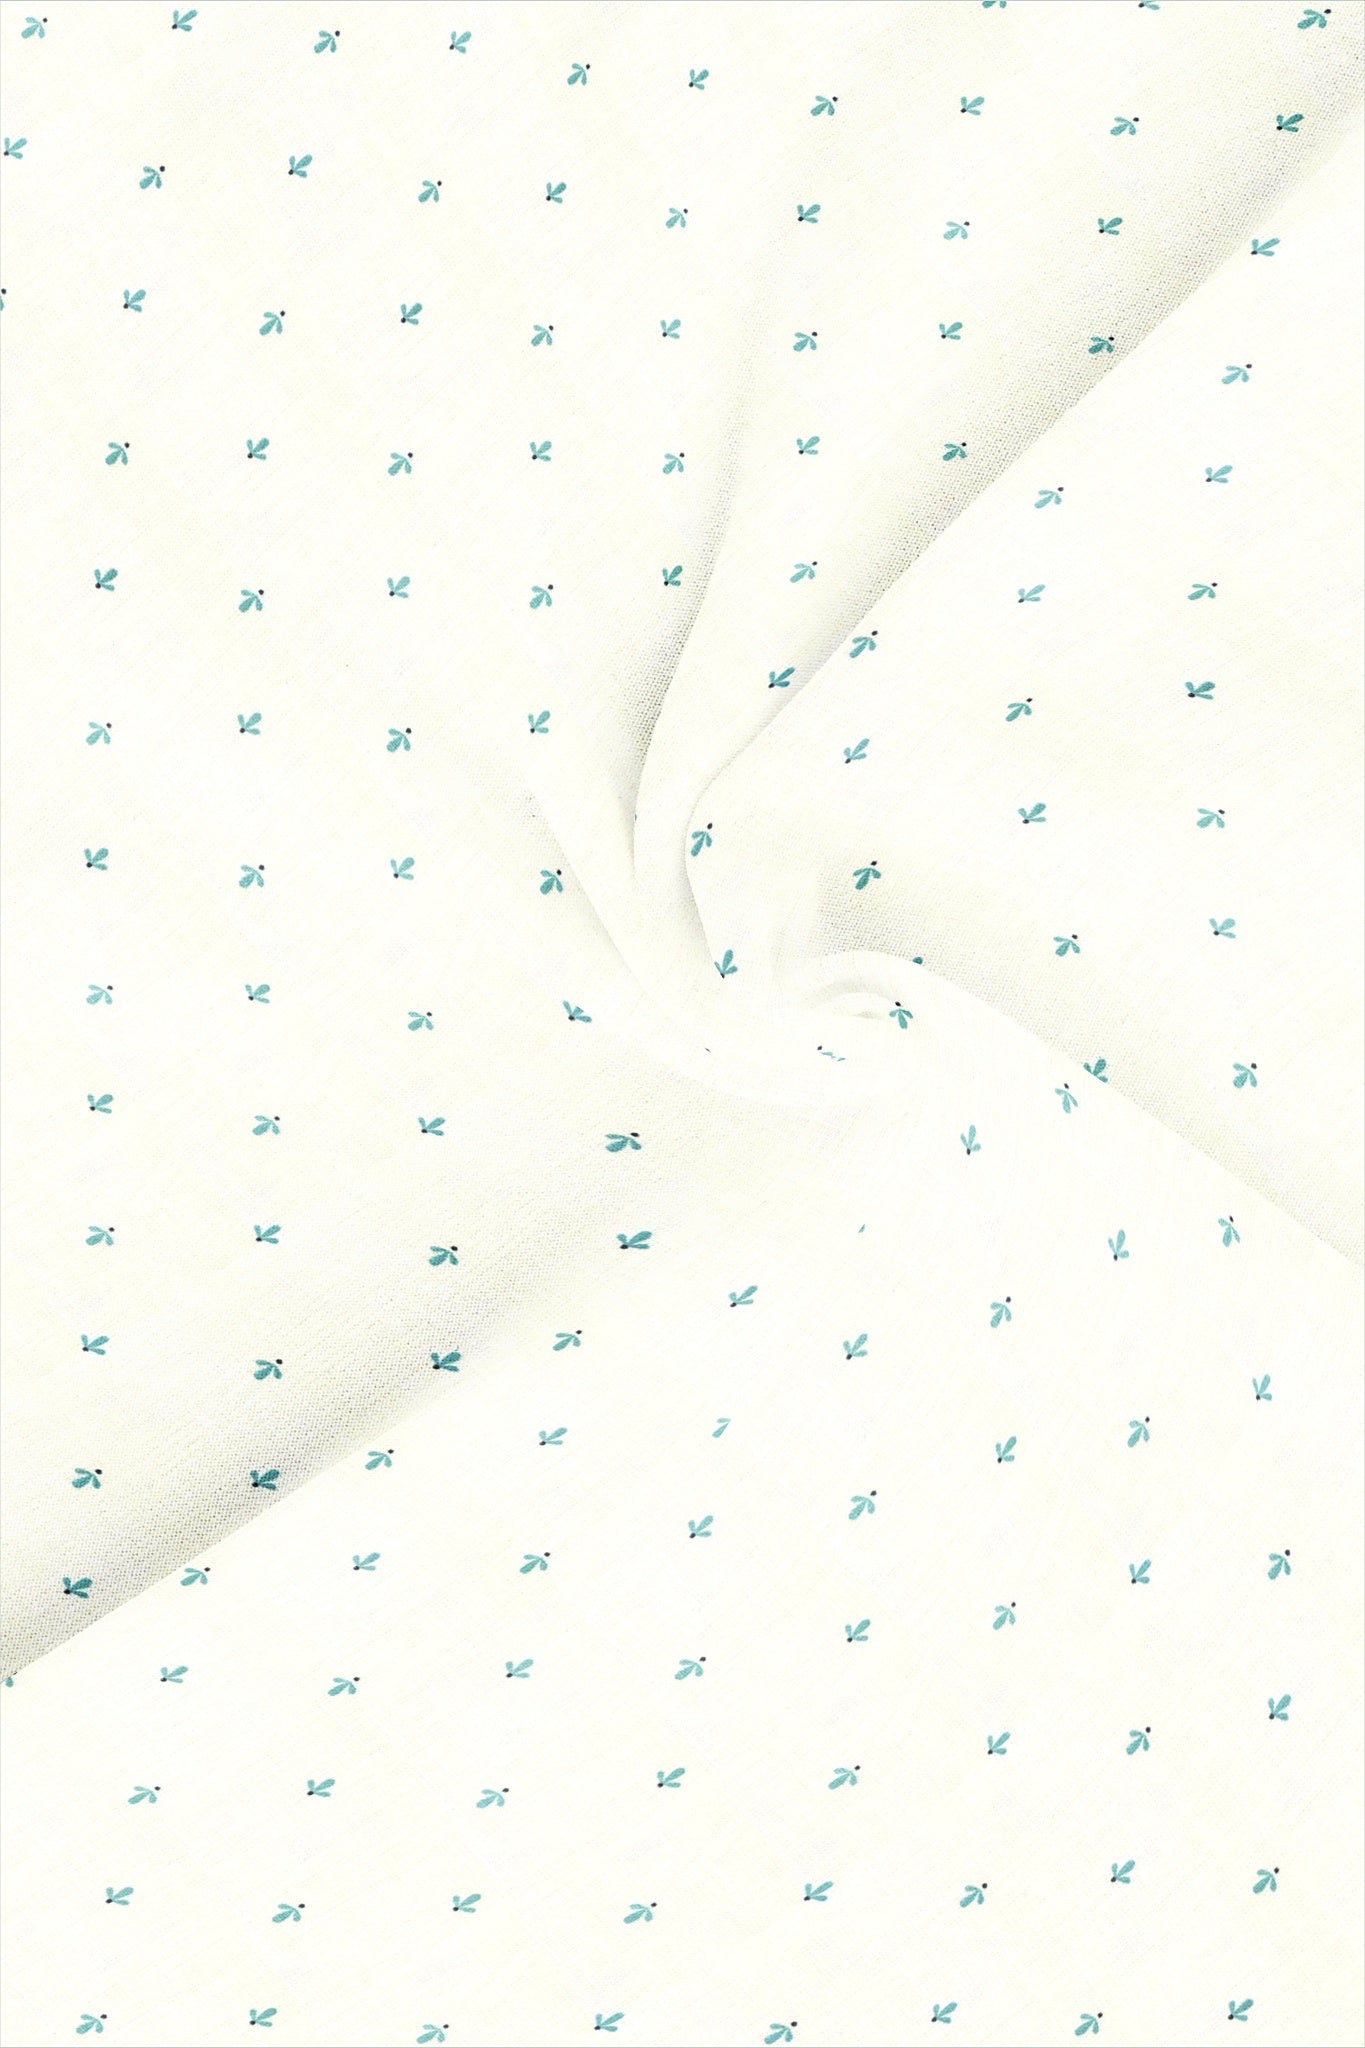 Bright White and Turquoise Blue Cactus Printed Luxurious Linen Shirt